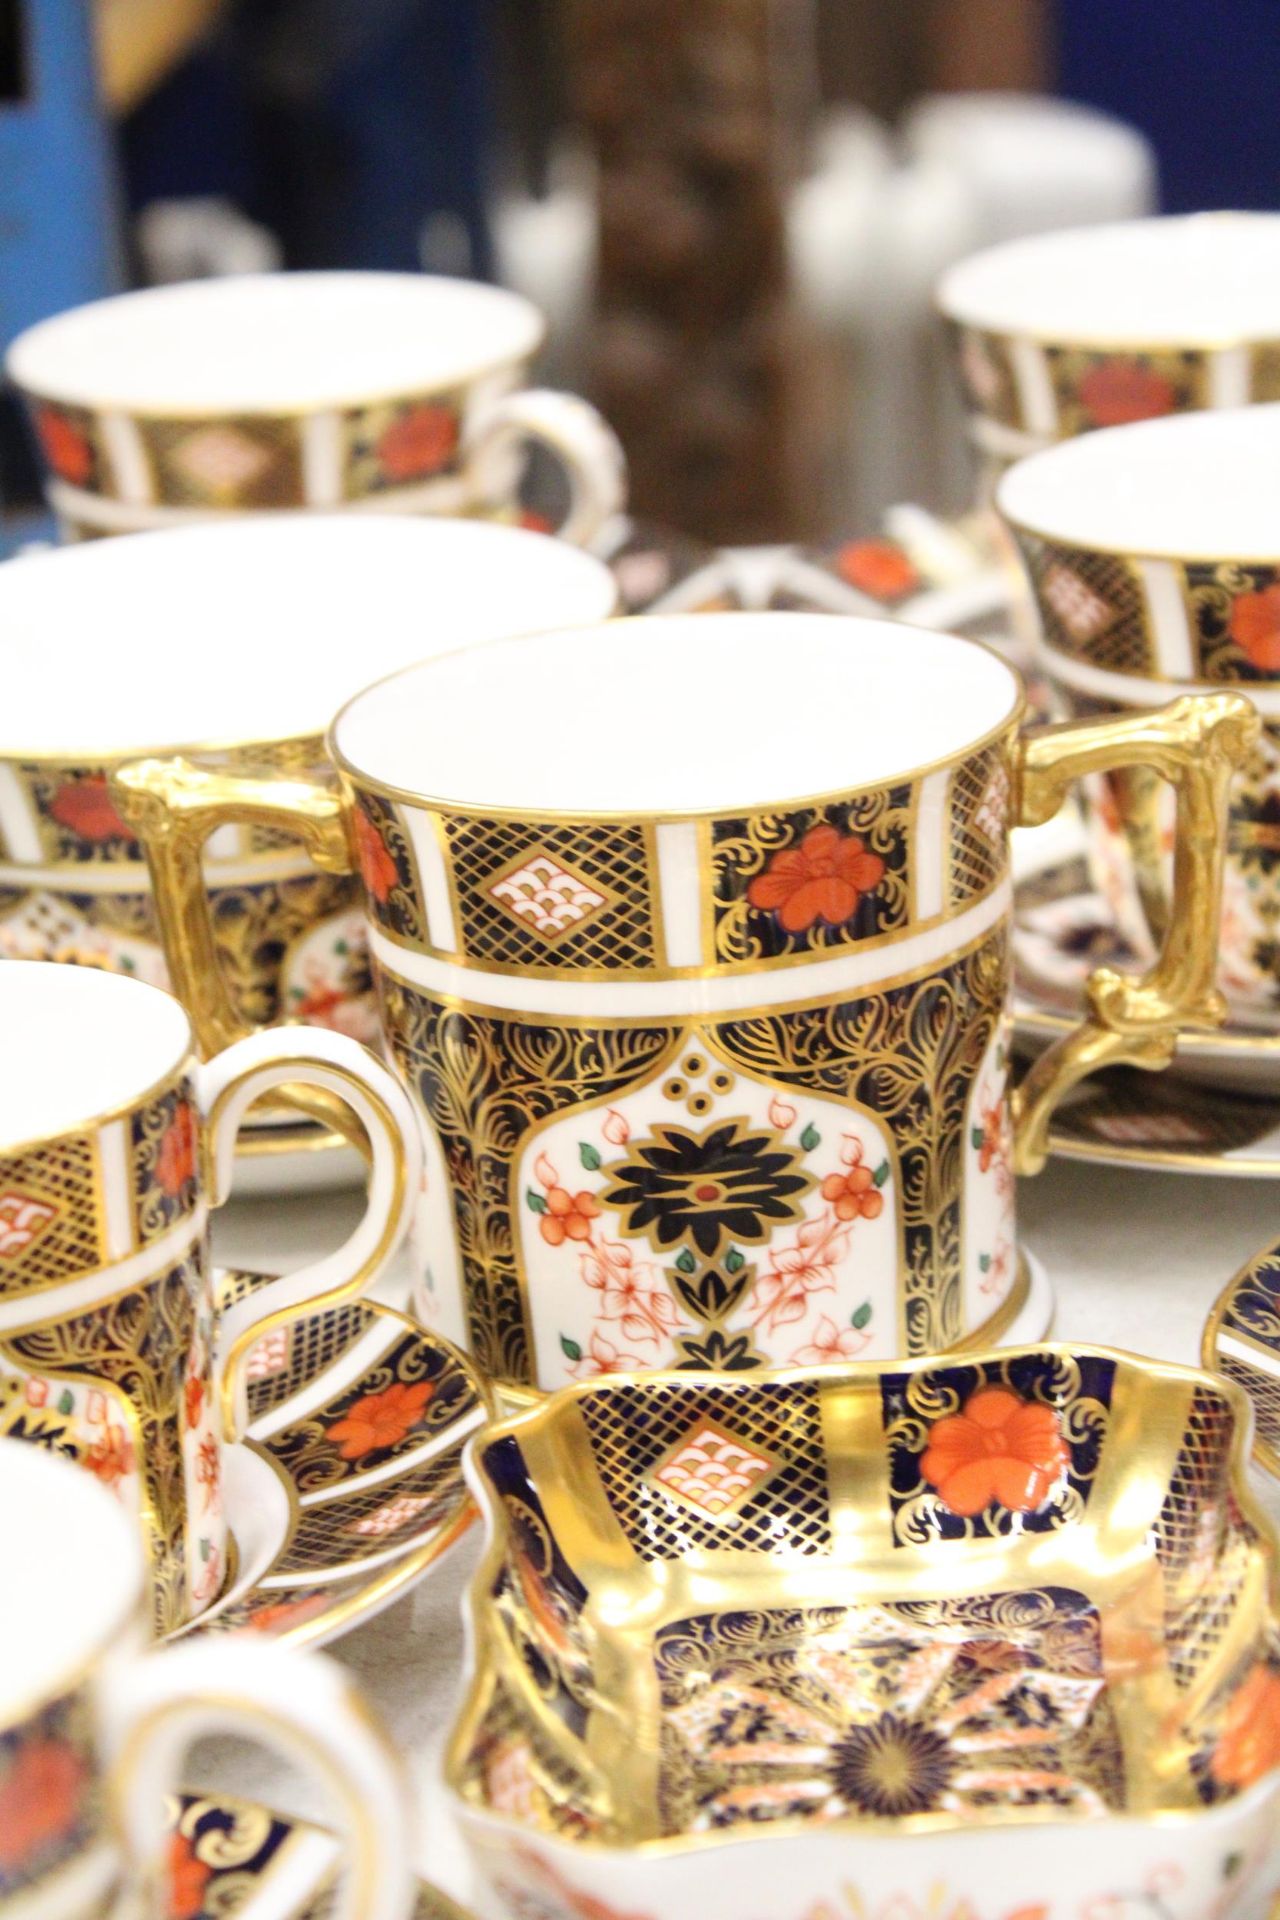 A QUANTITY OF ROYAL CROWN DERBY TO INCLUDE A LOVING CUP , COFFEE CANS AND SAUCERS, TEACUPS AND - Image 6 of 7